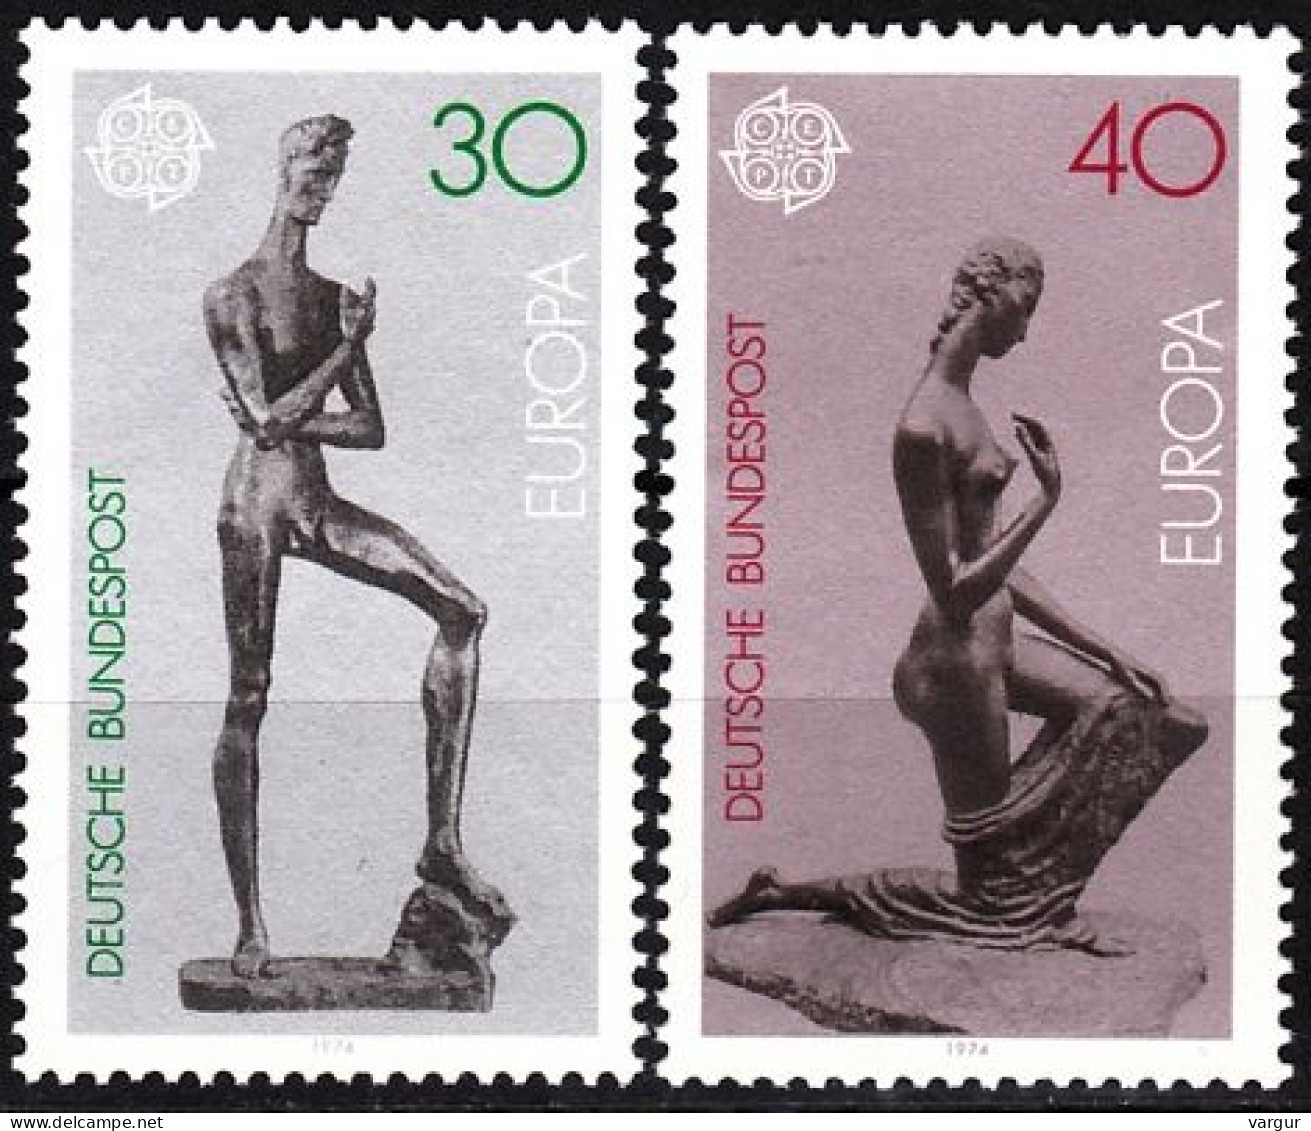 GERMANY 1974 EUROPA: Sculpture. Complete Set, MNH - 1974